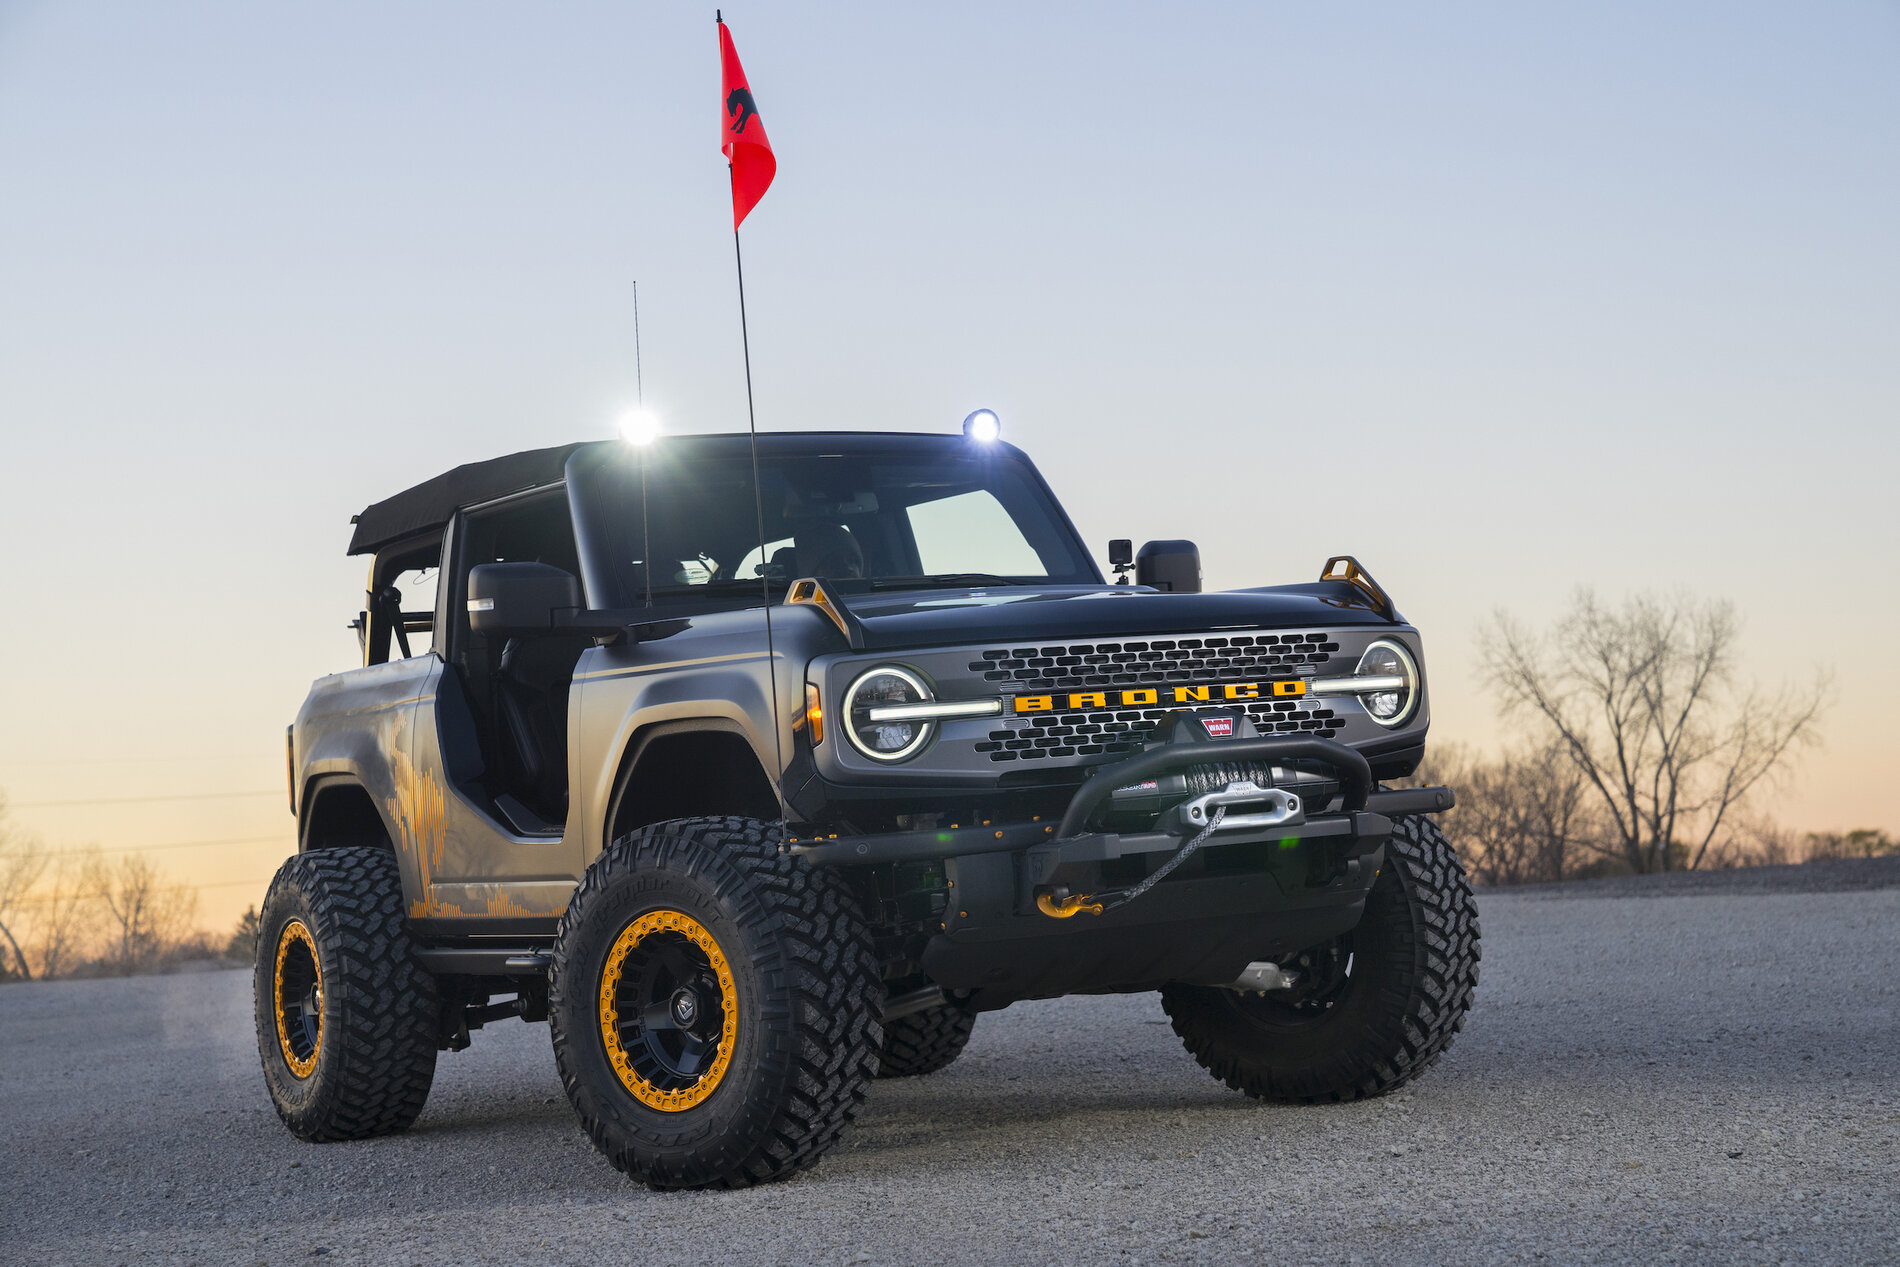 Ford Bronco Official Wallpapers and Video: Bronco Badlands Sasquatch 2-Door SEMA Concept Ford Bronco Badlands Sasquatch 2-Door Concept_01.JPG